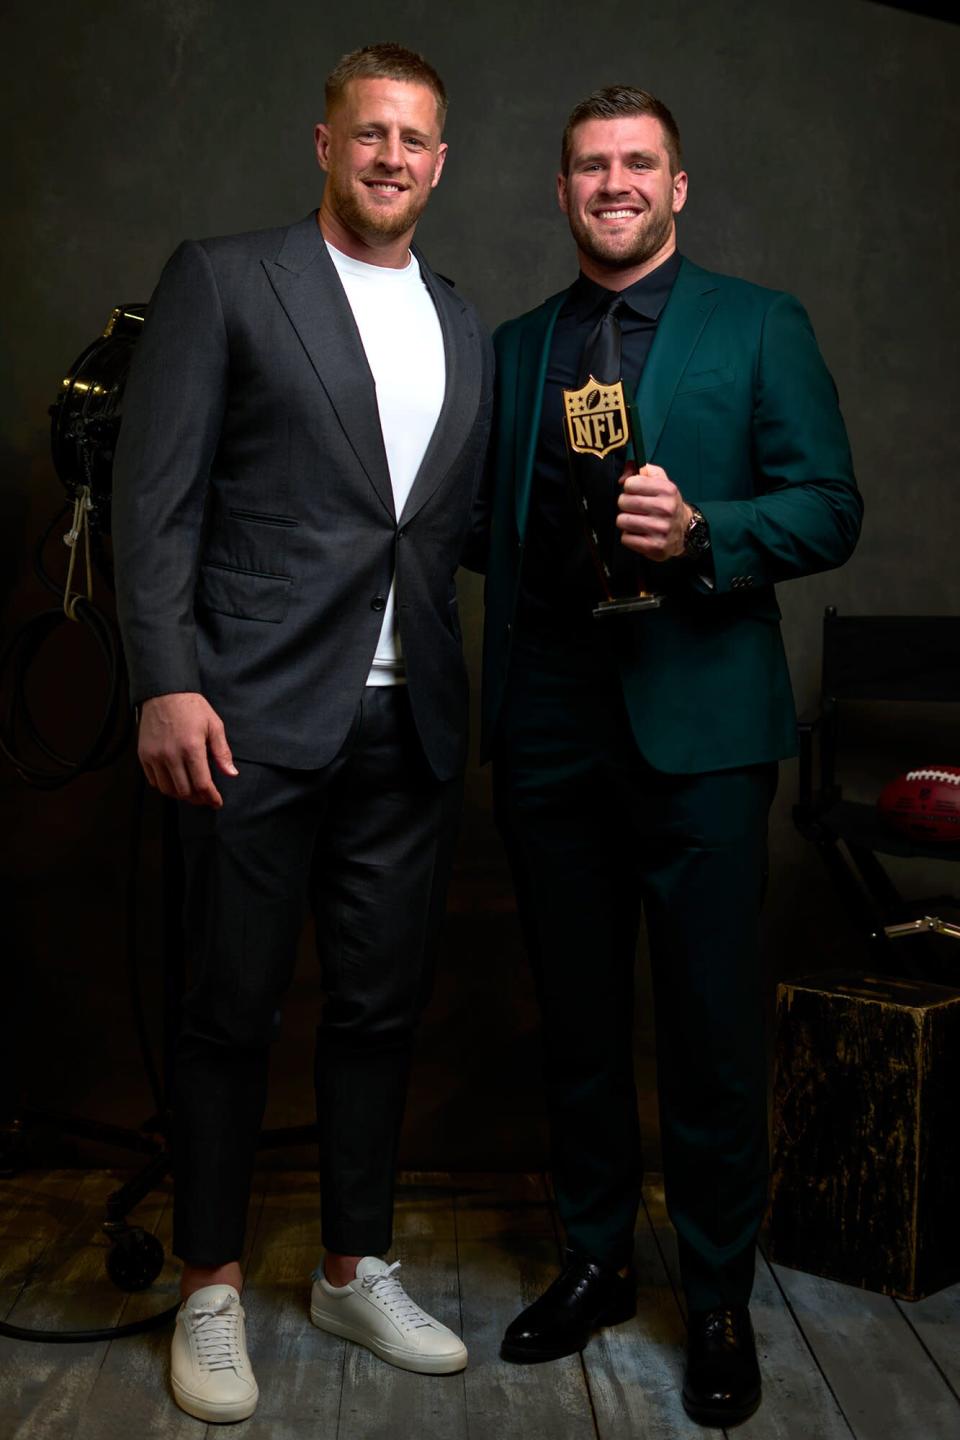 T.J. Watt poses with brother JJ for a portrait after winning the Deacon Jones Sack Leader Award during the NFL Honors